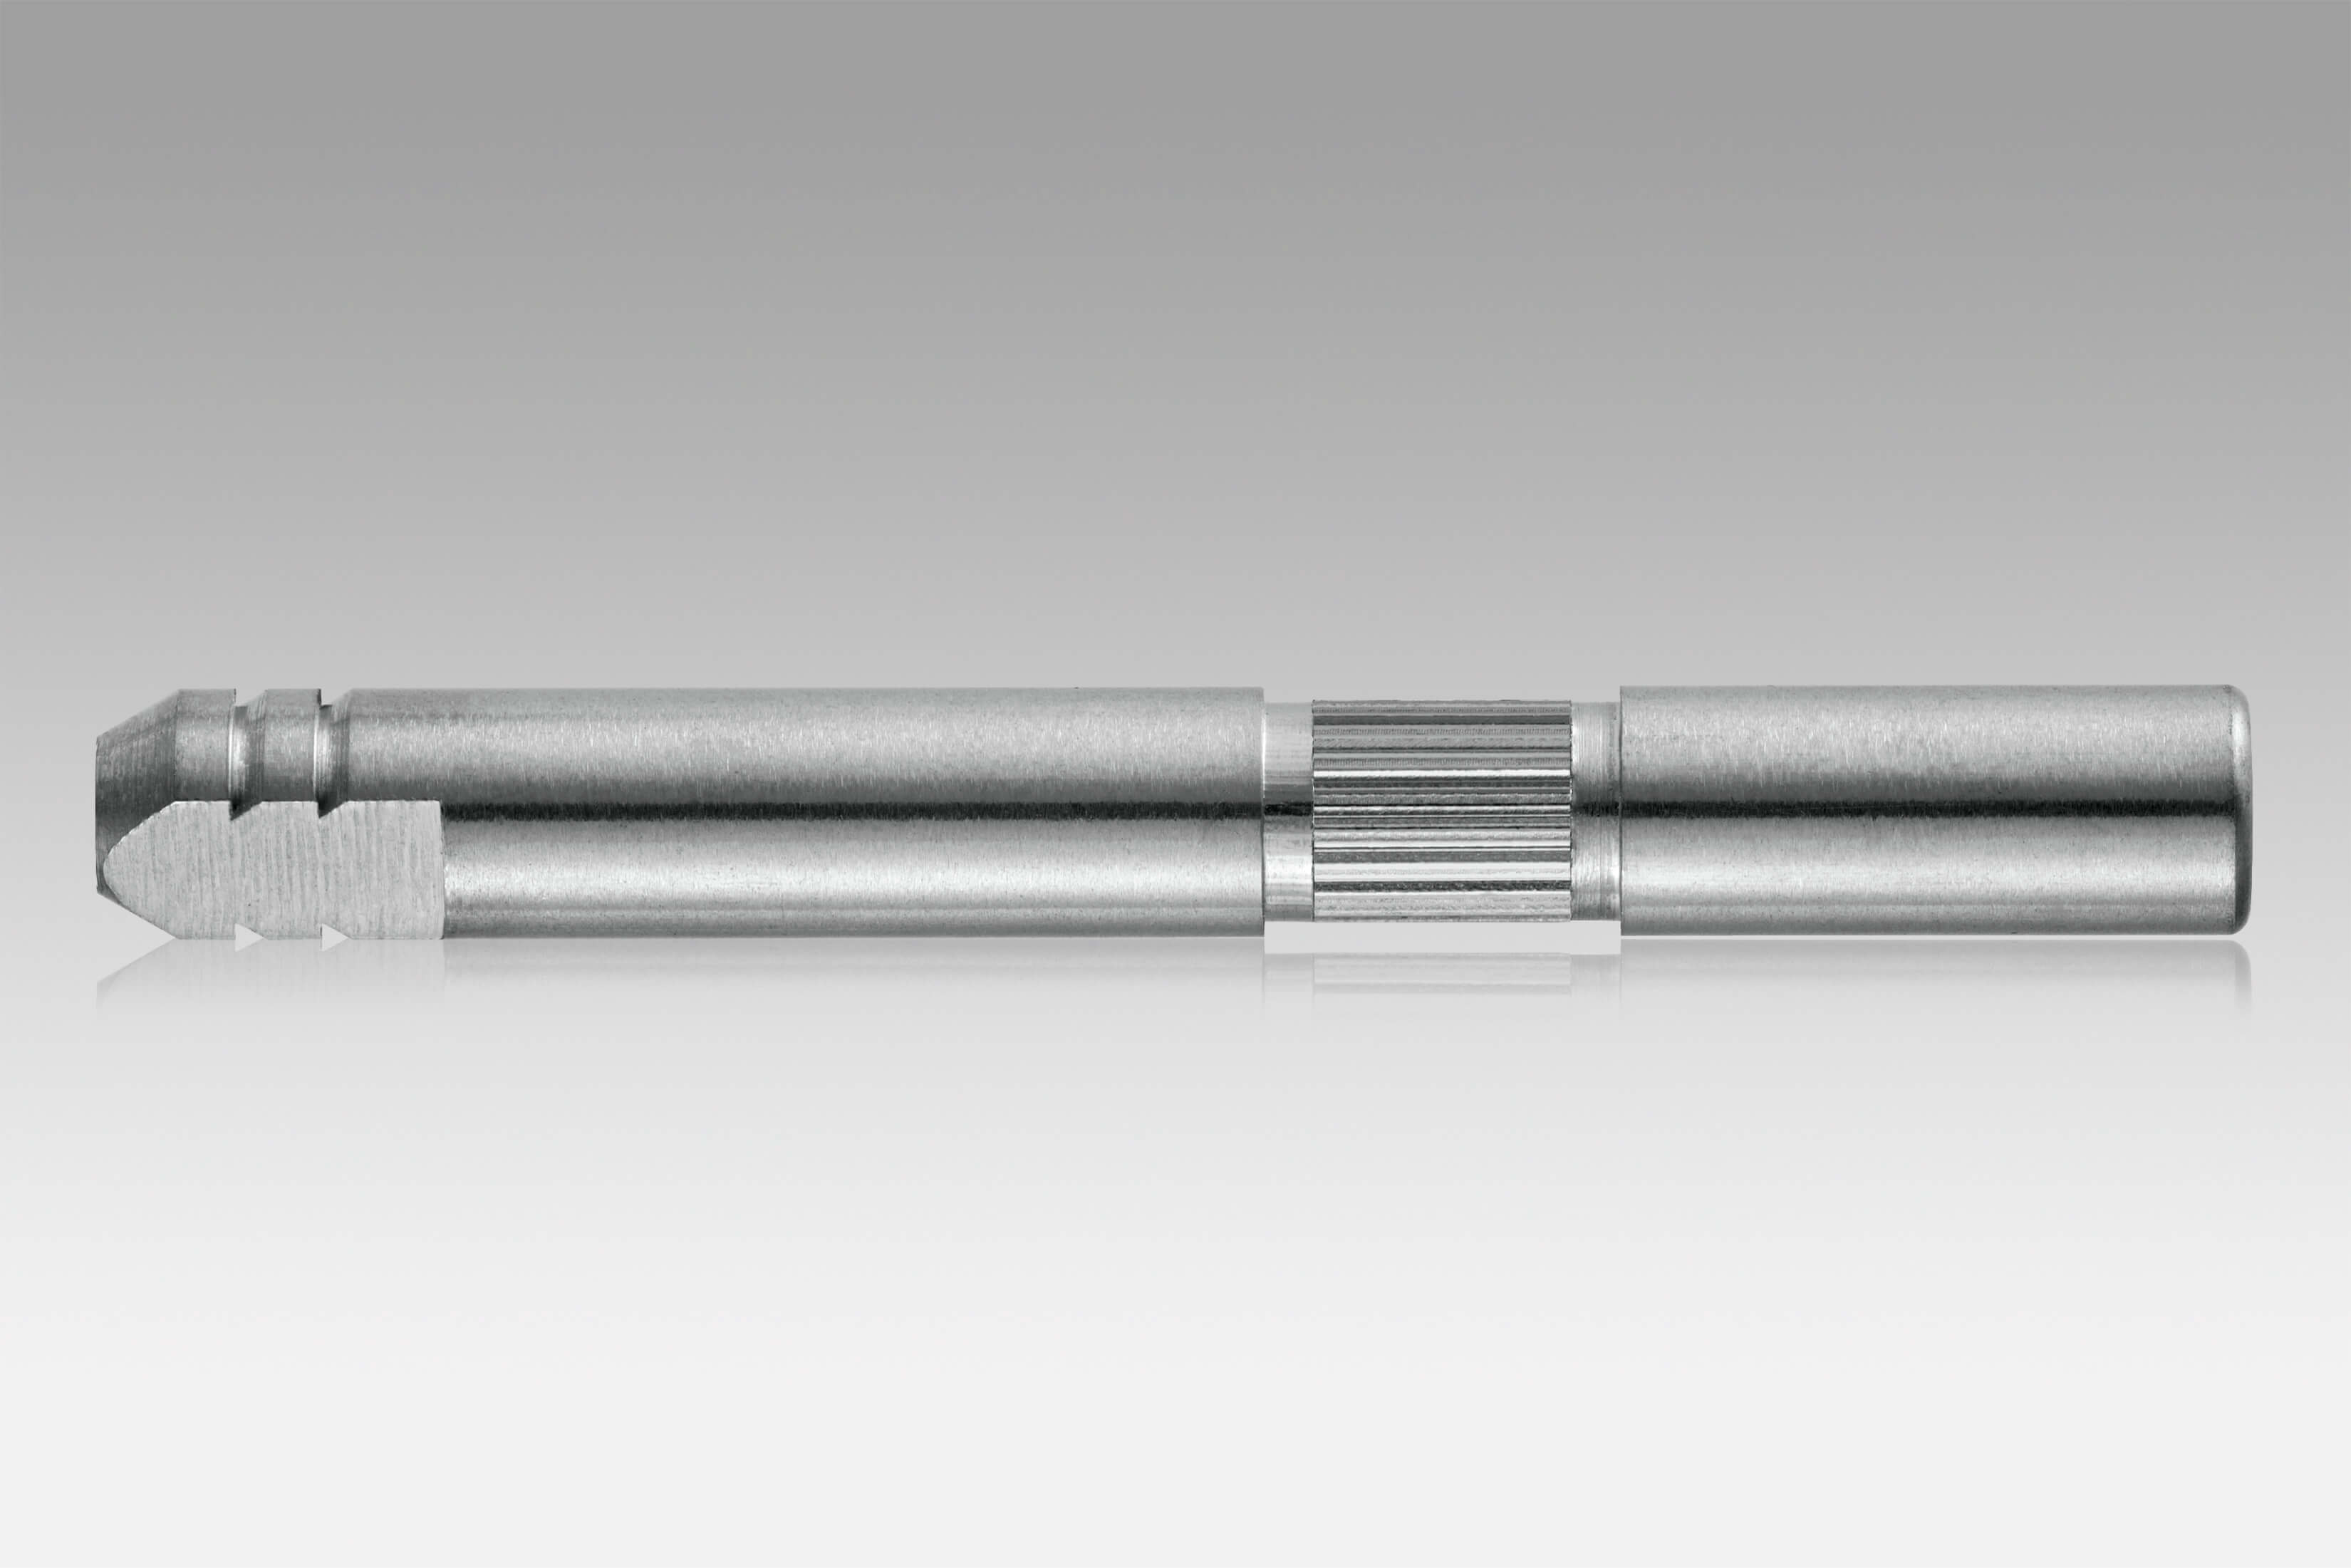 : Knurled shaft, spindle - Swiss supplier and manufacturer of micro-parts for watchmaking